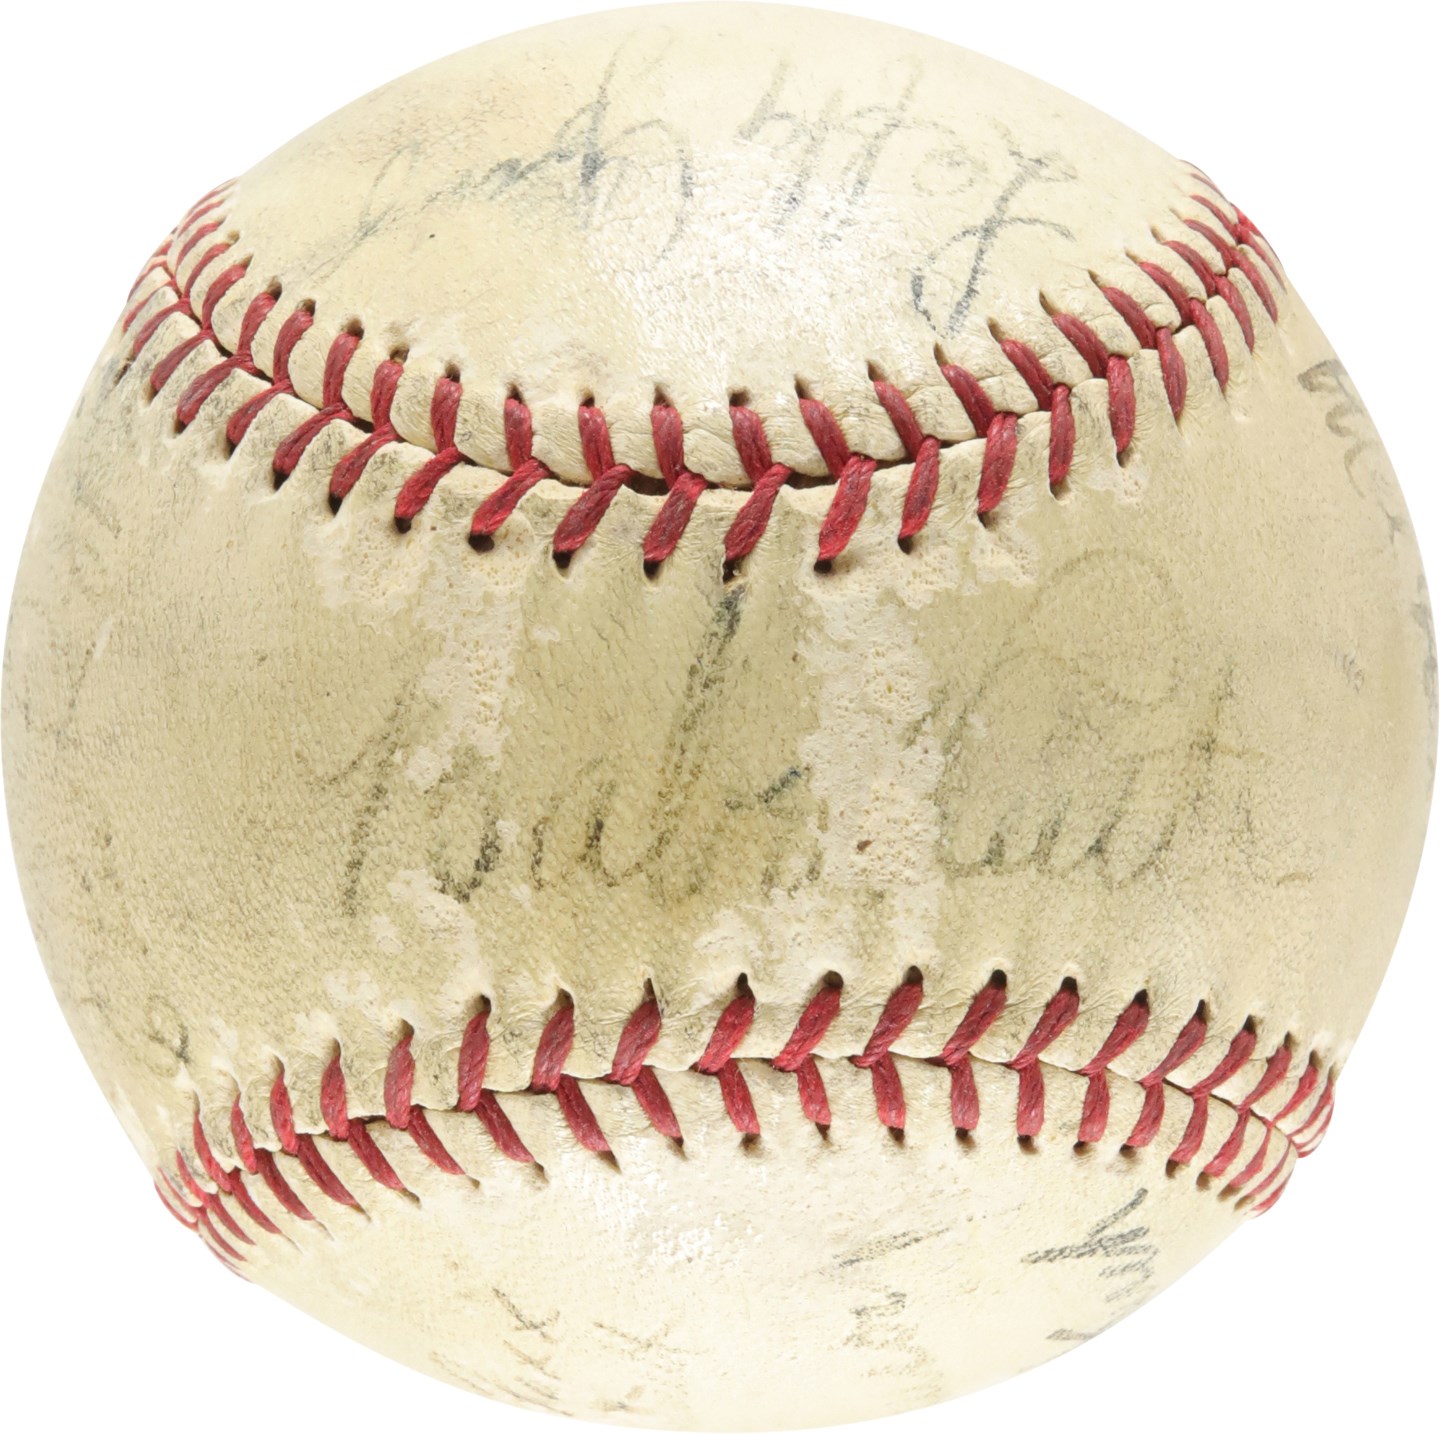 1934 All-Star Game Signed Baseball  - Hubbell Fans 5 in a Row - with Ruth, Gehrig, Foxx, Simmons, Cronin & W. Johnson (PSA)